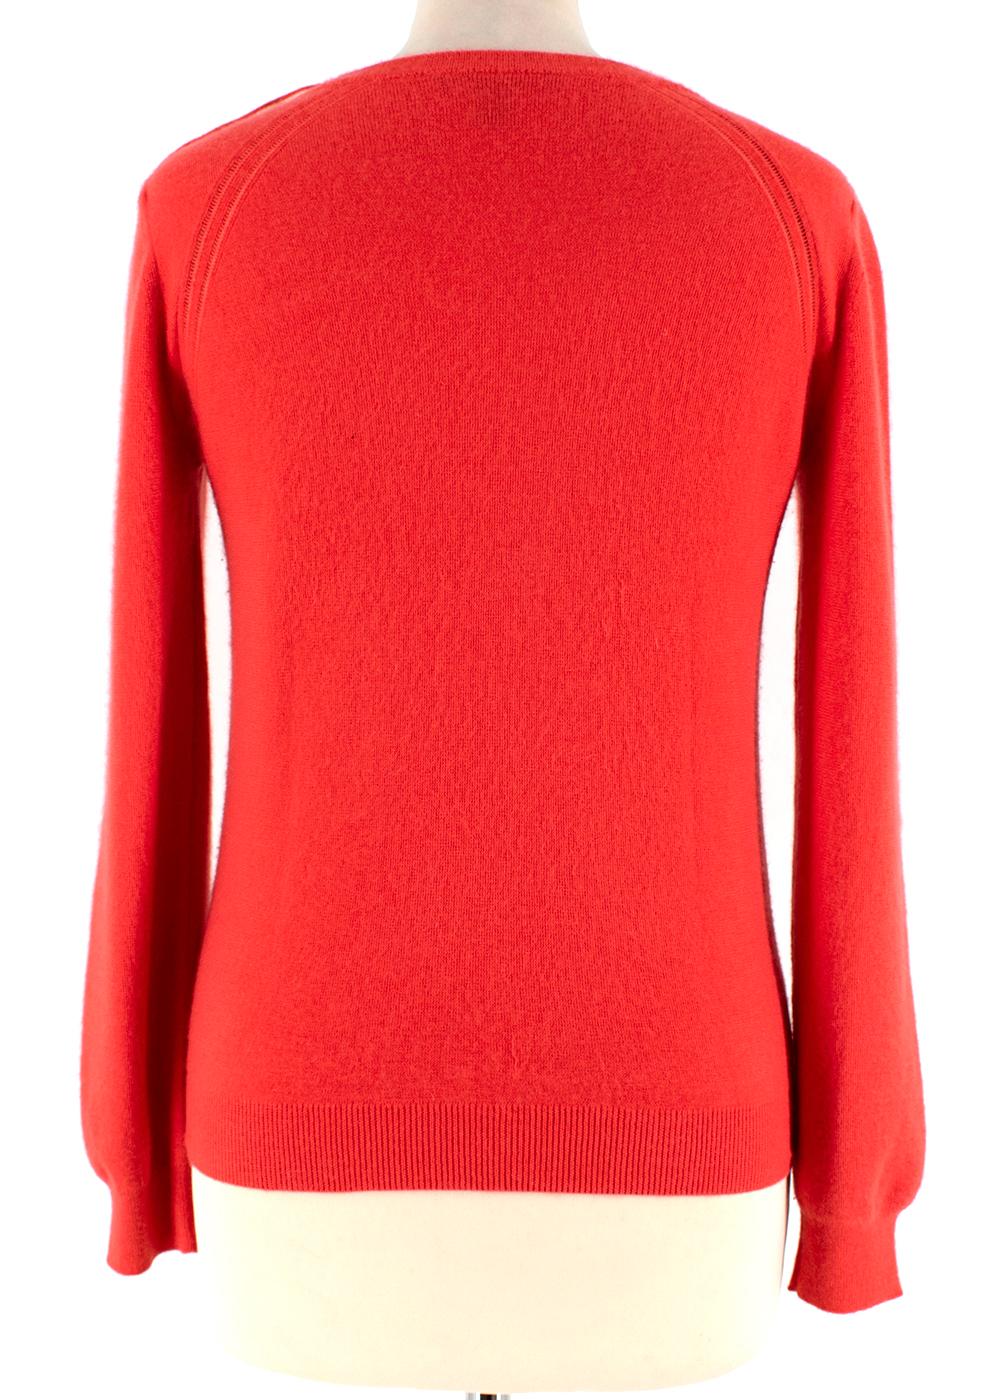 Red Louis Vuitton Coral Cashmere Blend Long-Sleeve Buttoned Jumper - Size XS